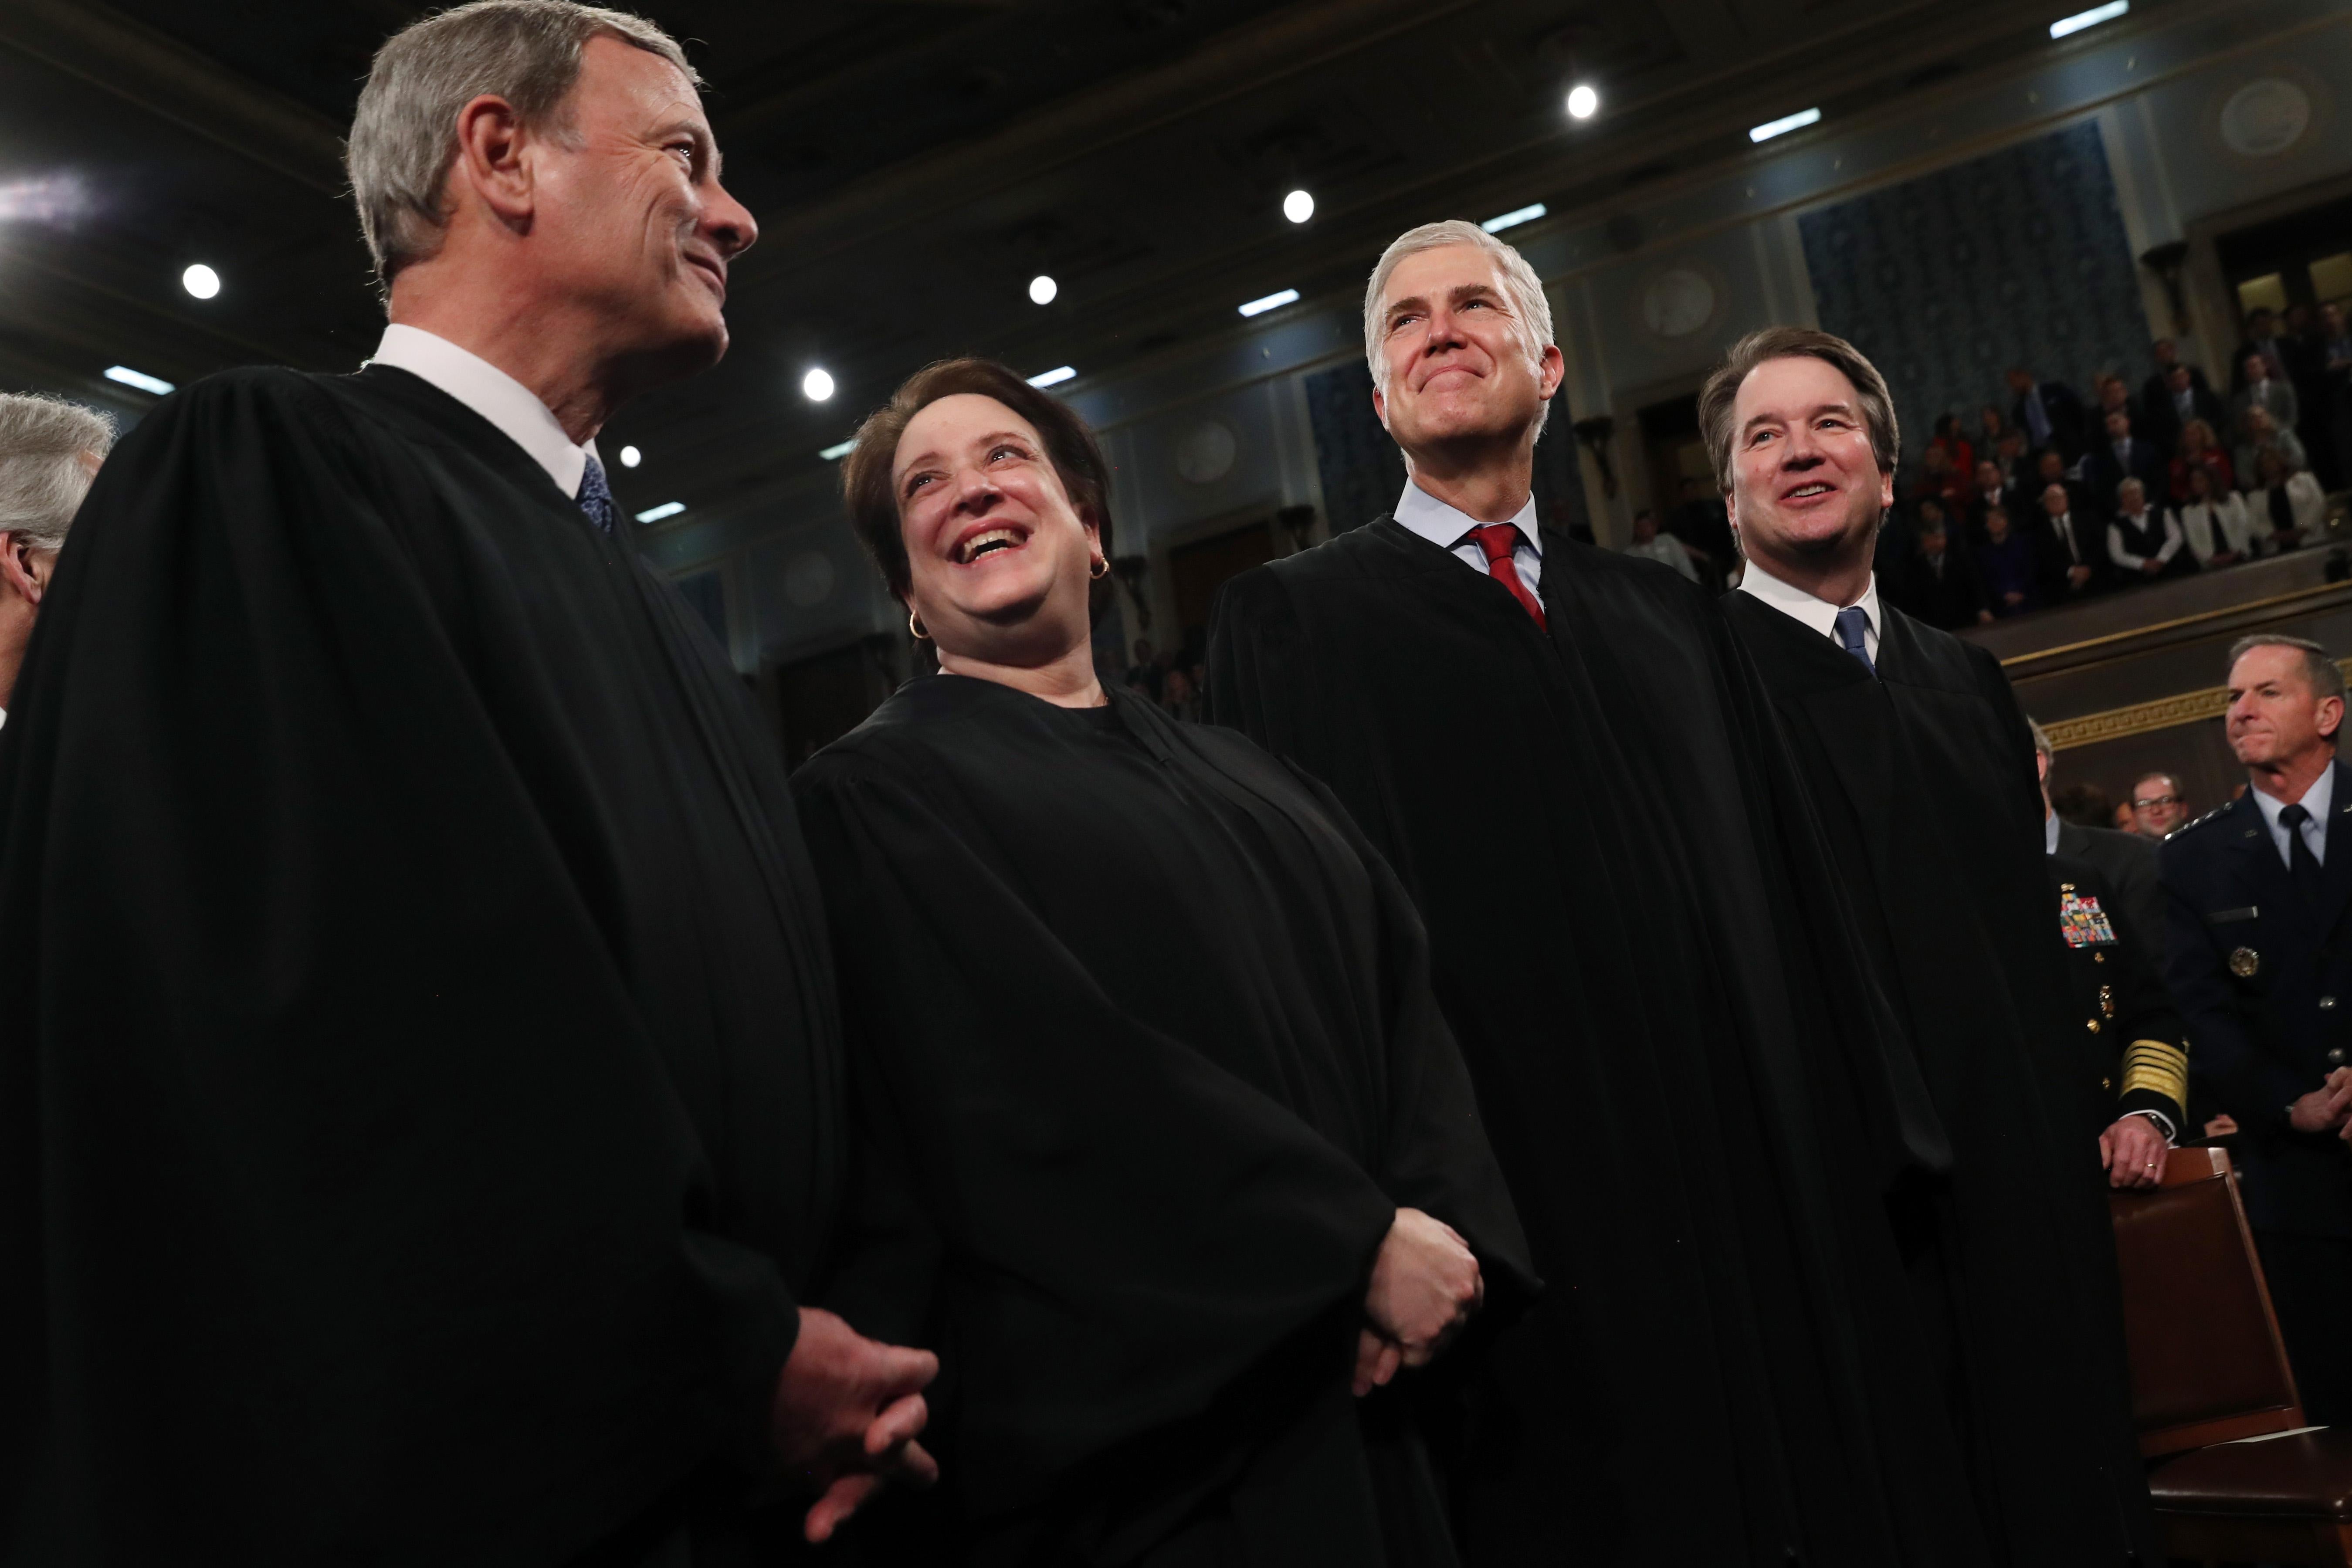 Supreme Court justices John Roberts, Elena Kagan, Neil Gorsuch and Brett Kavanaugh smile at each other while standing.